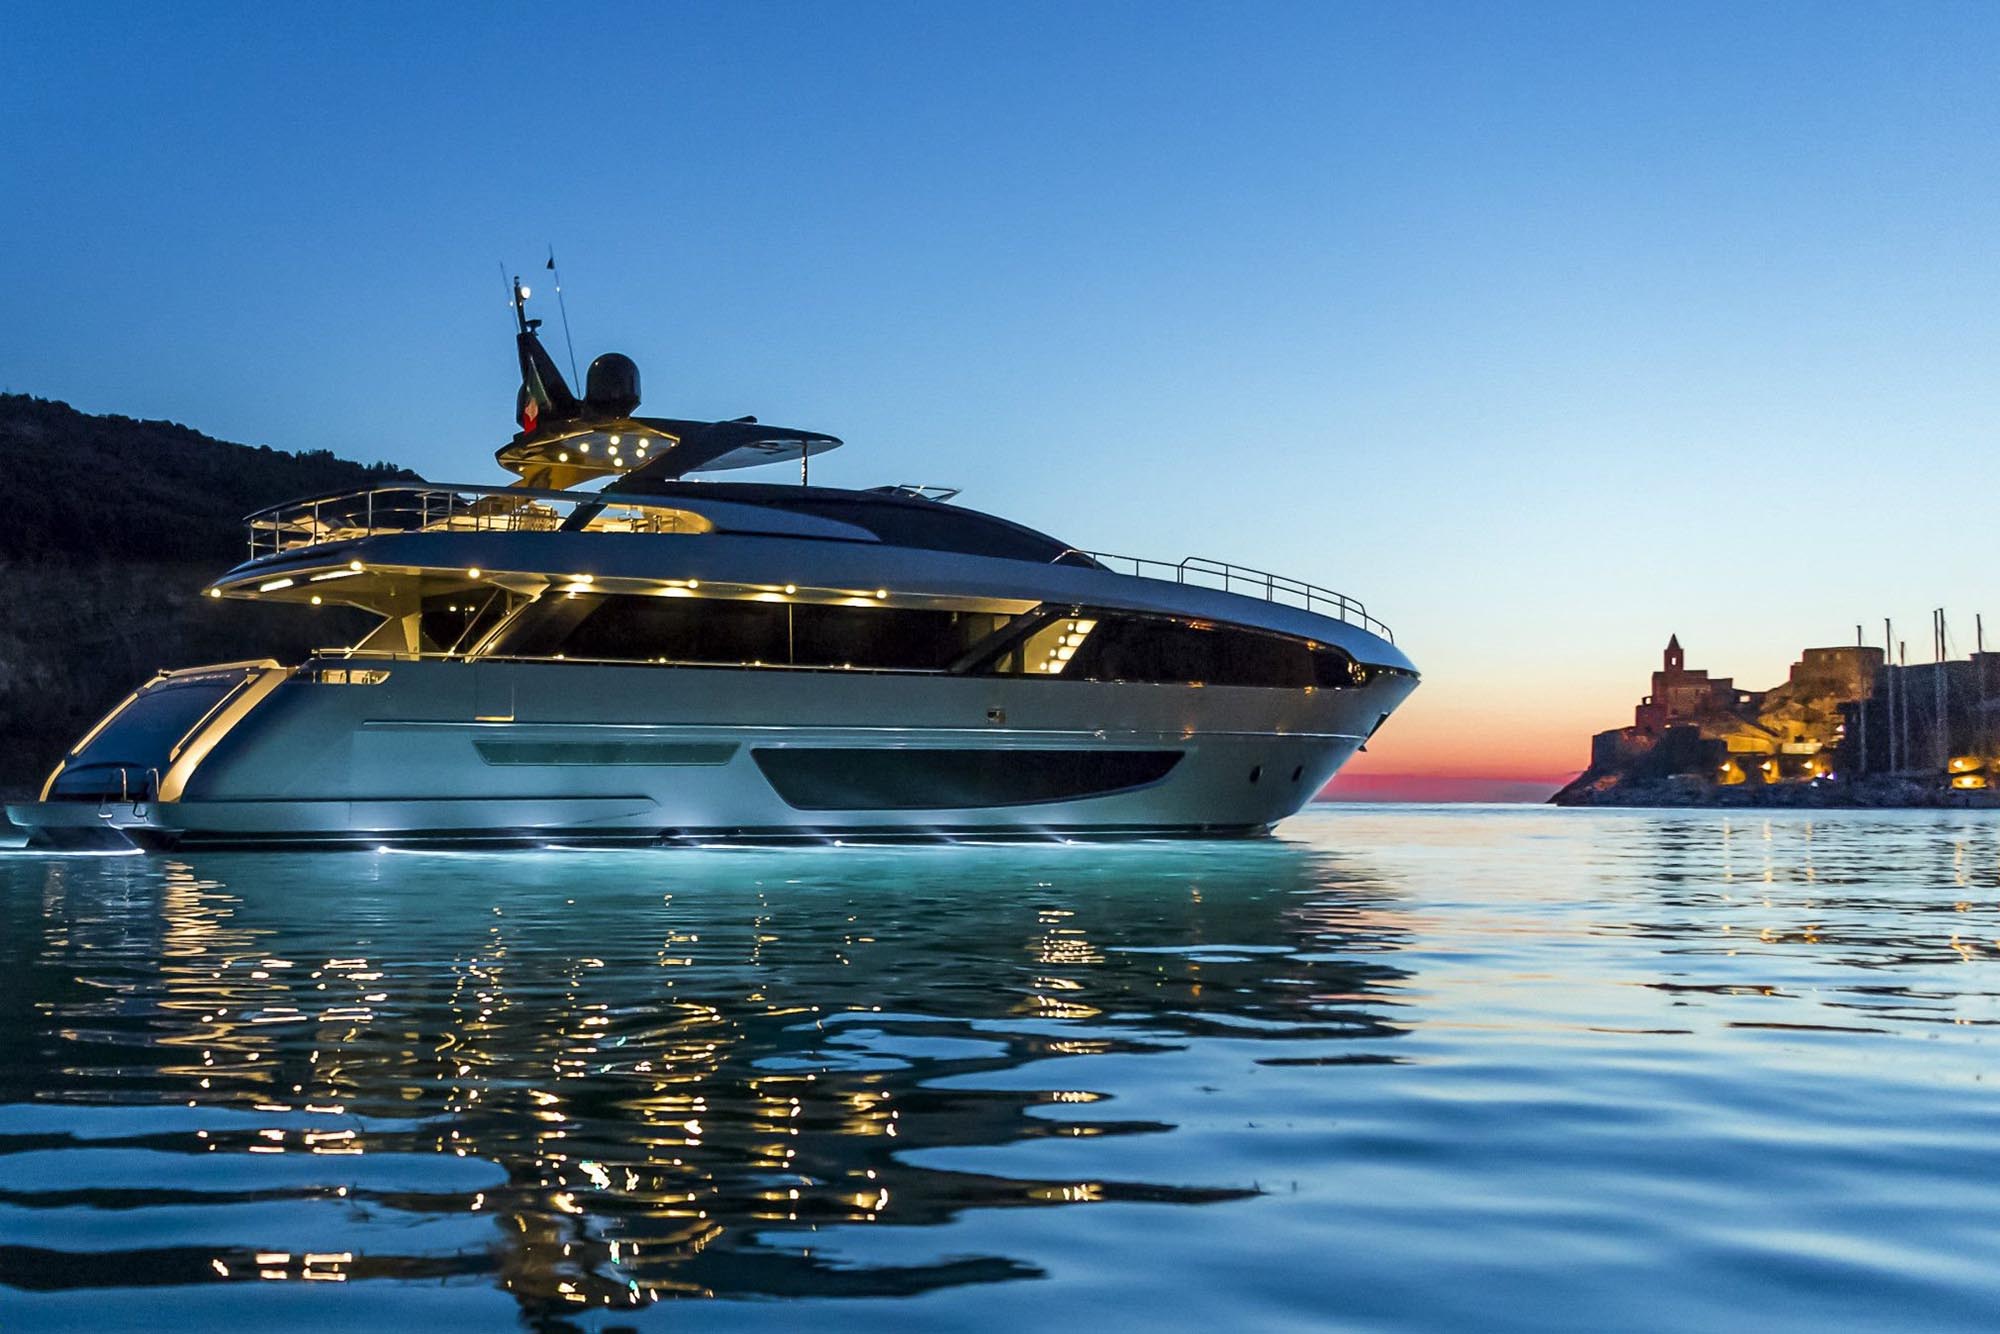 MAXIMUS Yacht for Charter - MAXIMUS Yacht Price - TWW Yachts